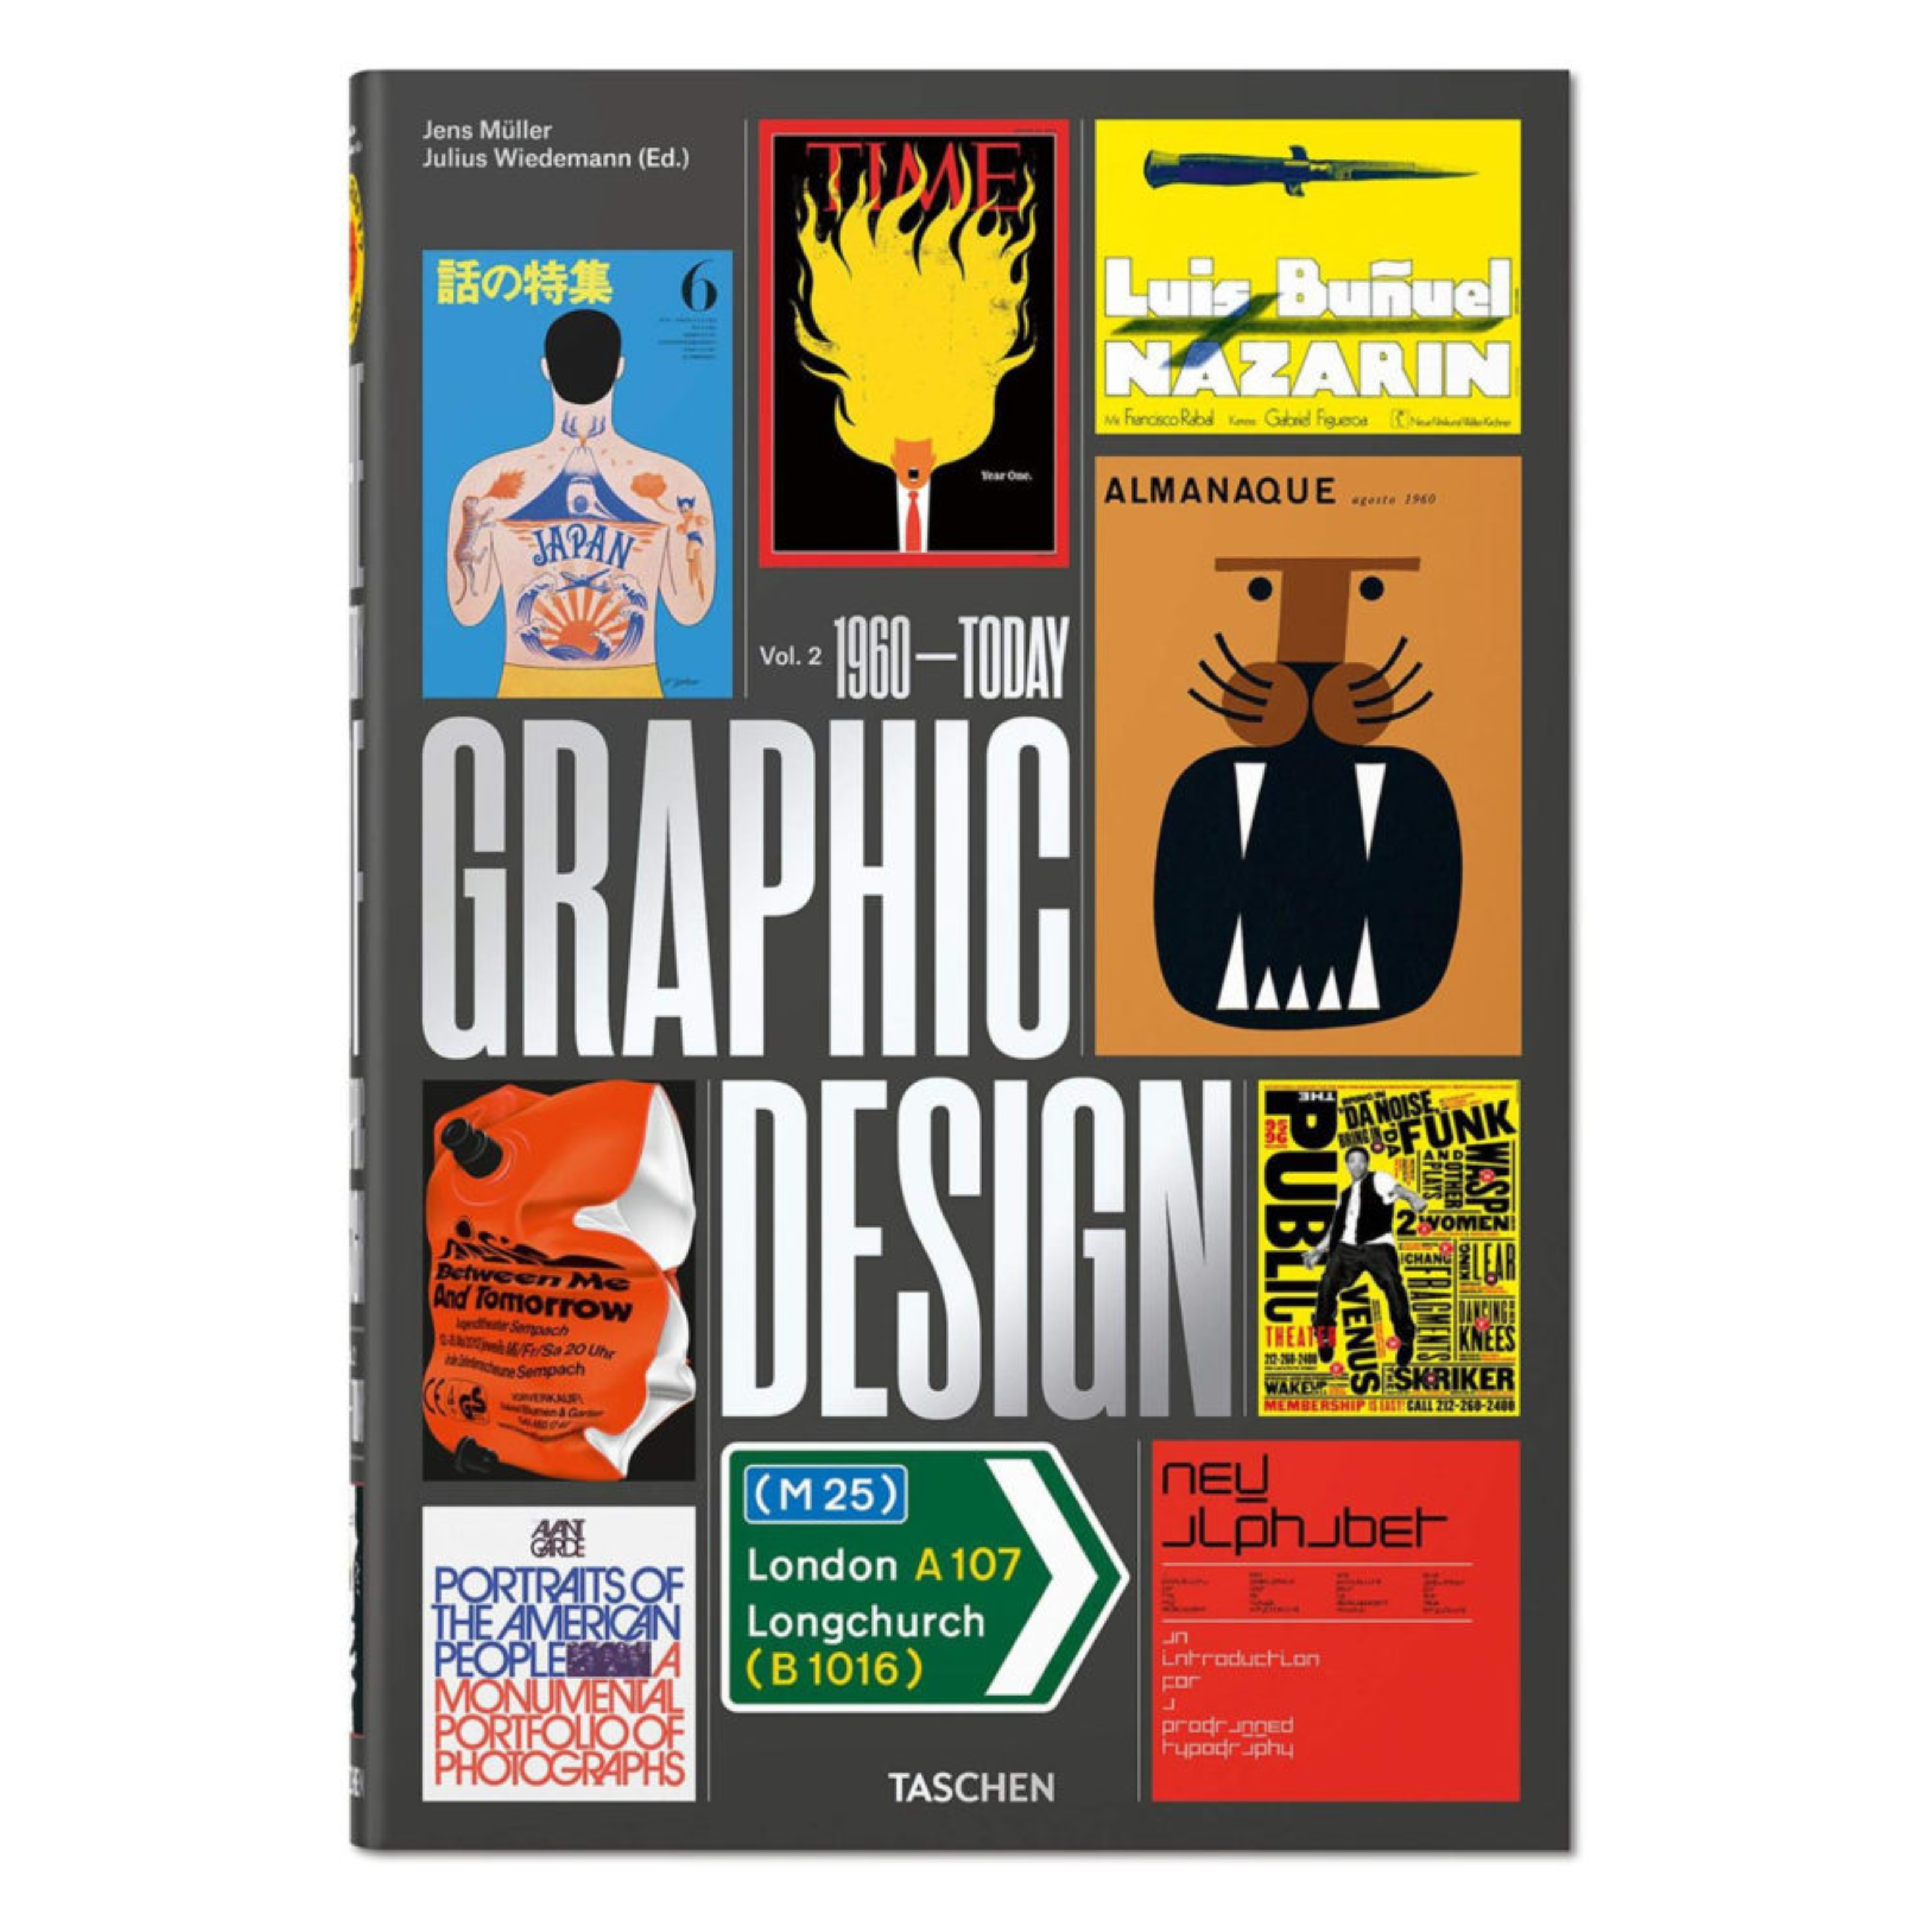 Artbook - Sách Tiếng Anh - The History of Graphic Design, Vol 2: 1960 - Today